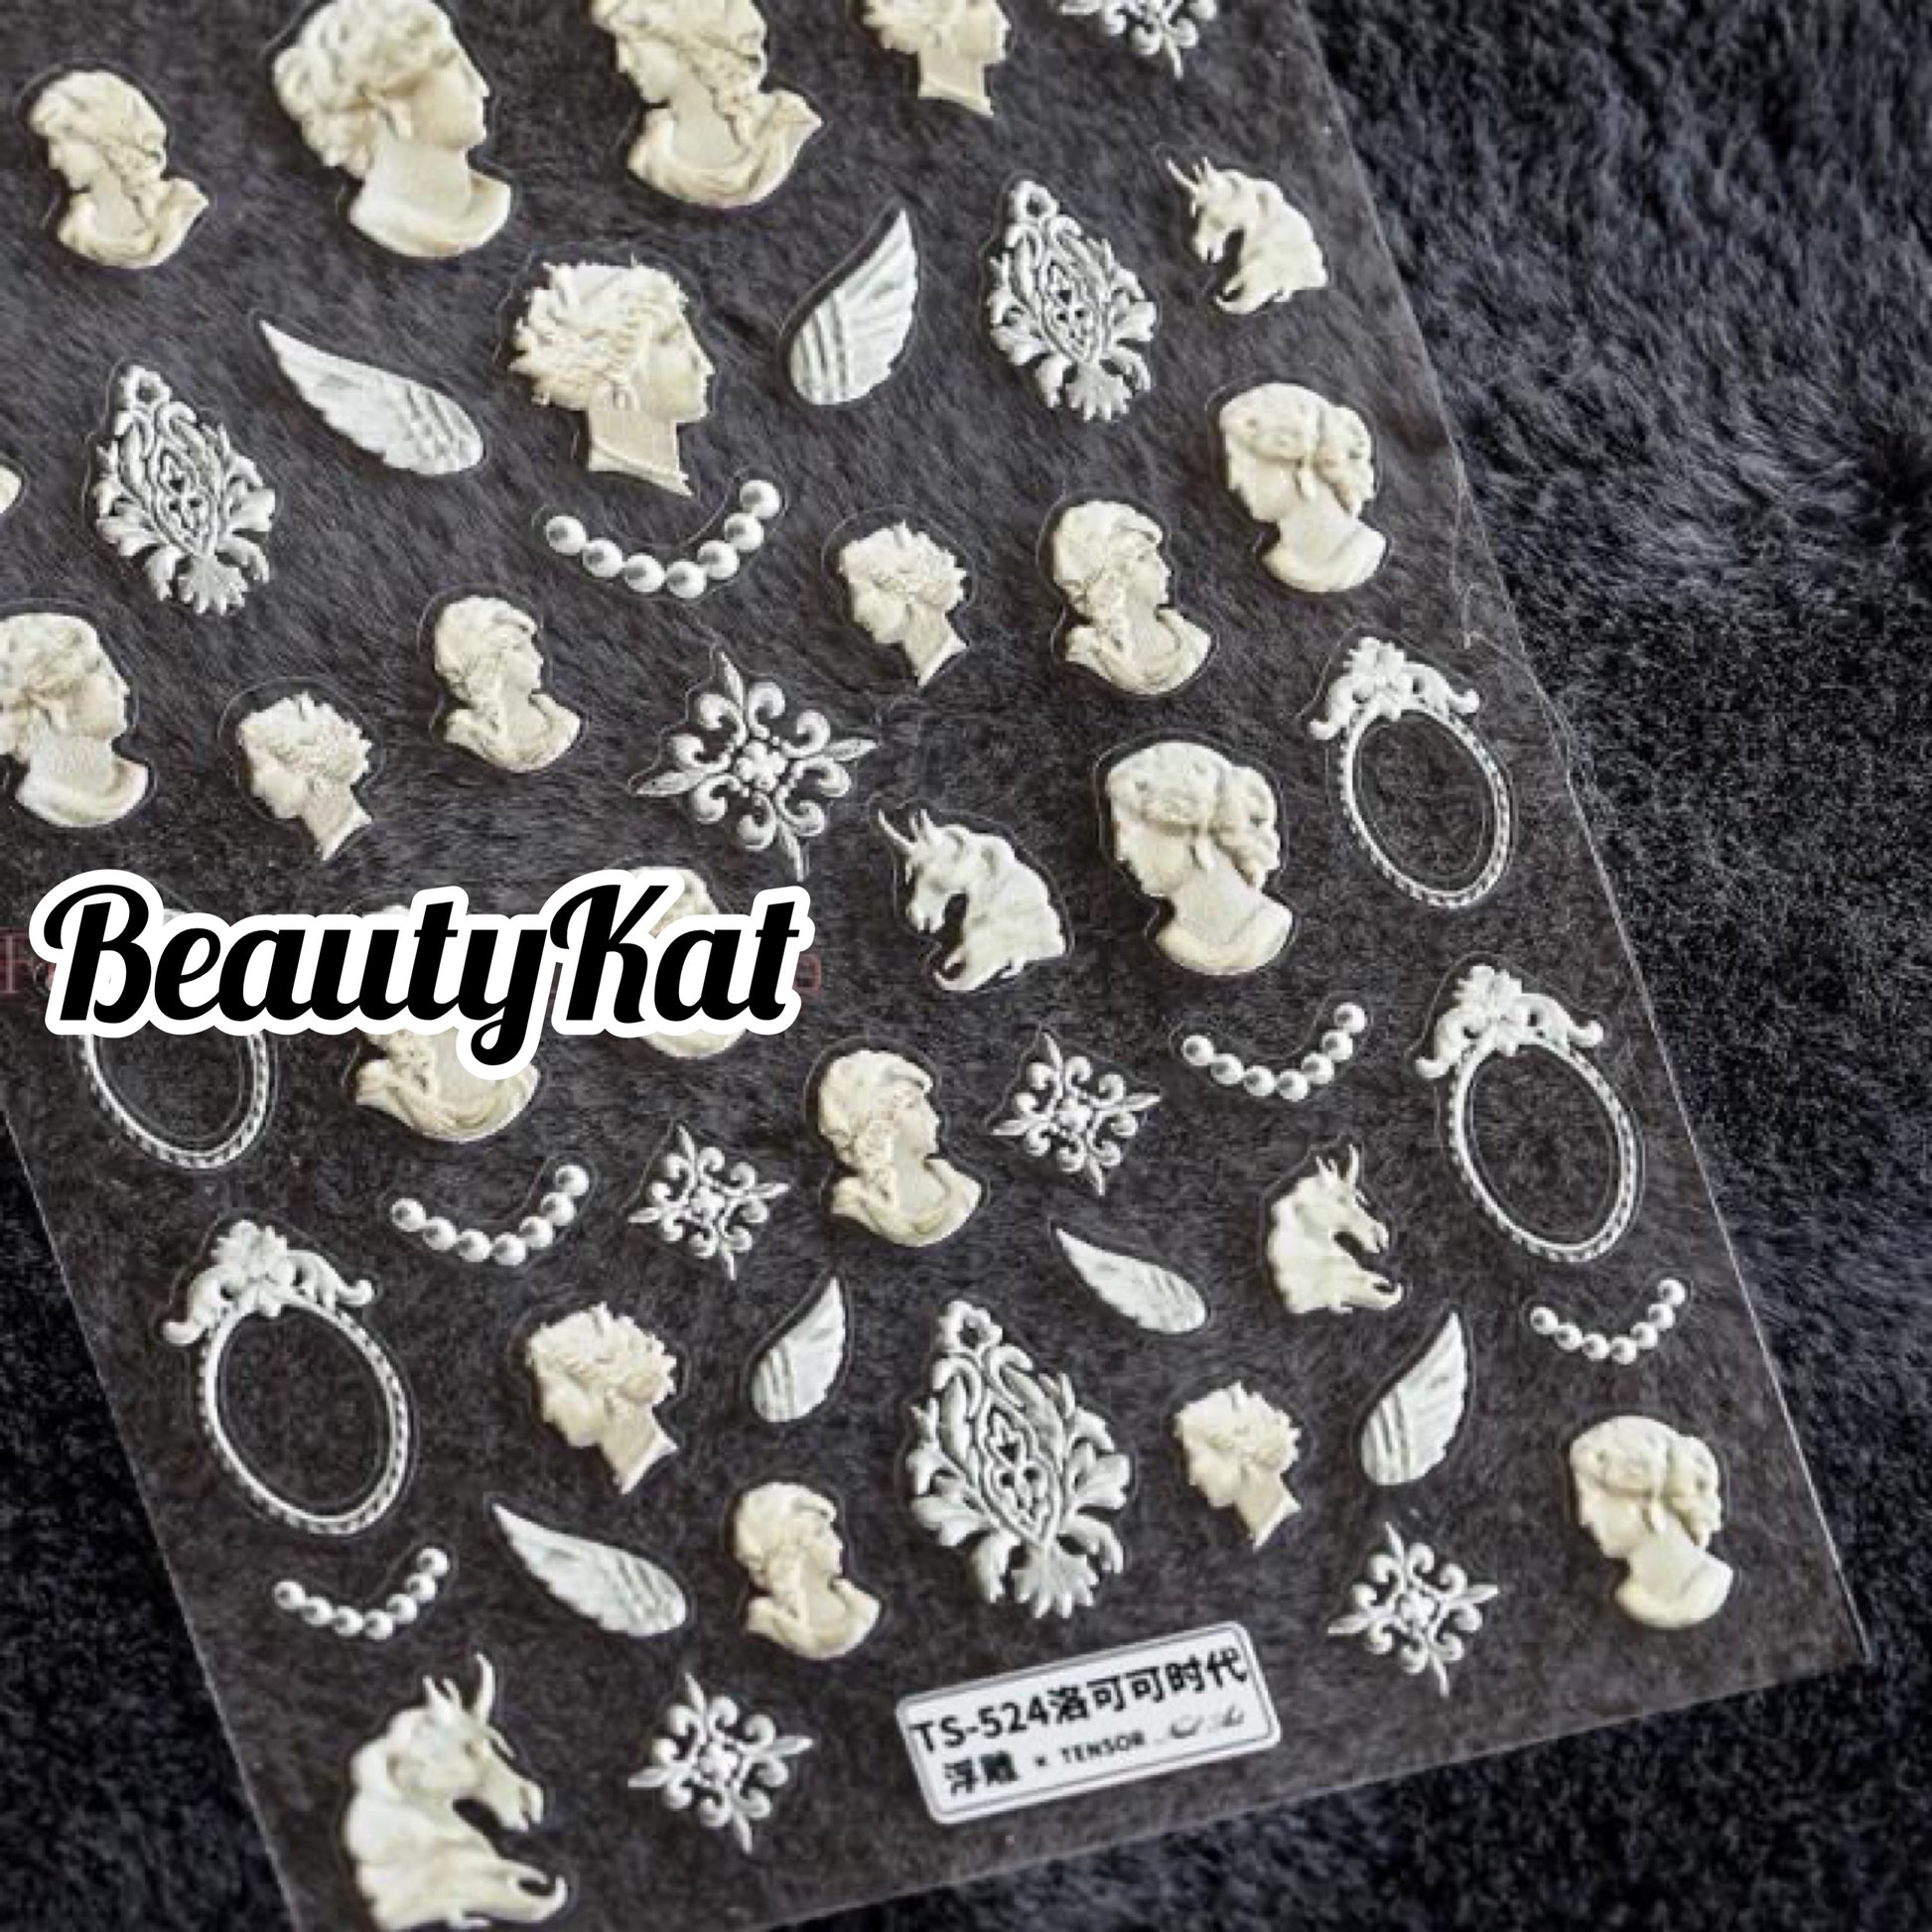  1 sheet 3D Embossed Rococo Head Nail Art Sticker Decal Decorations in Various Types (2 wks SHIP).